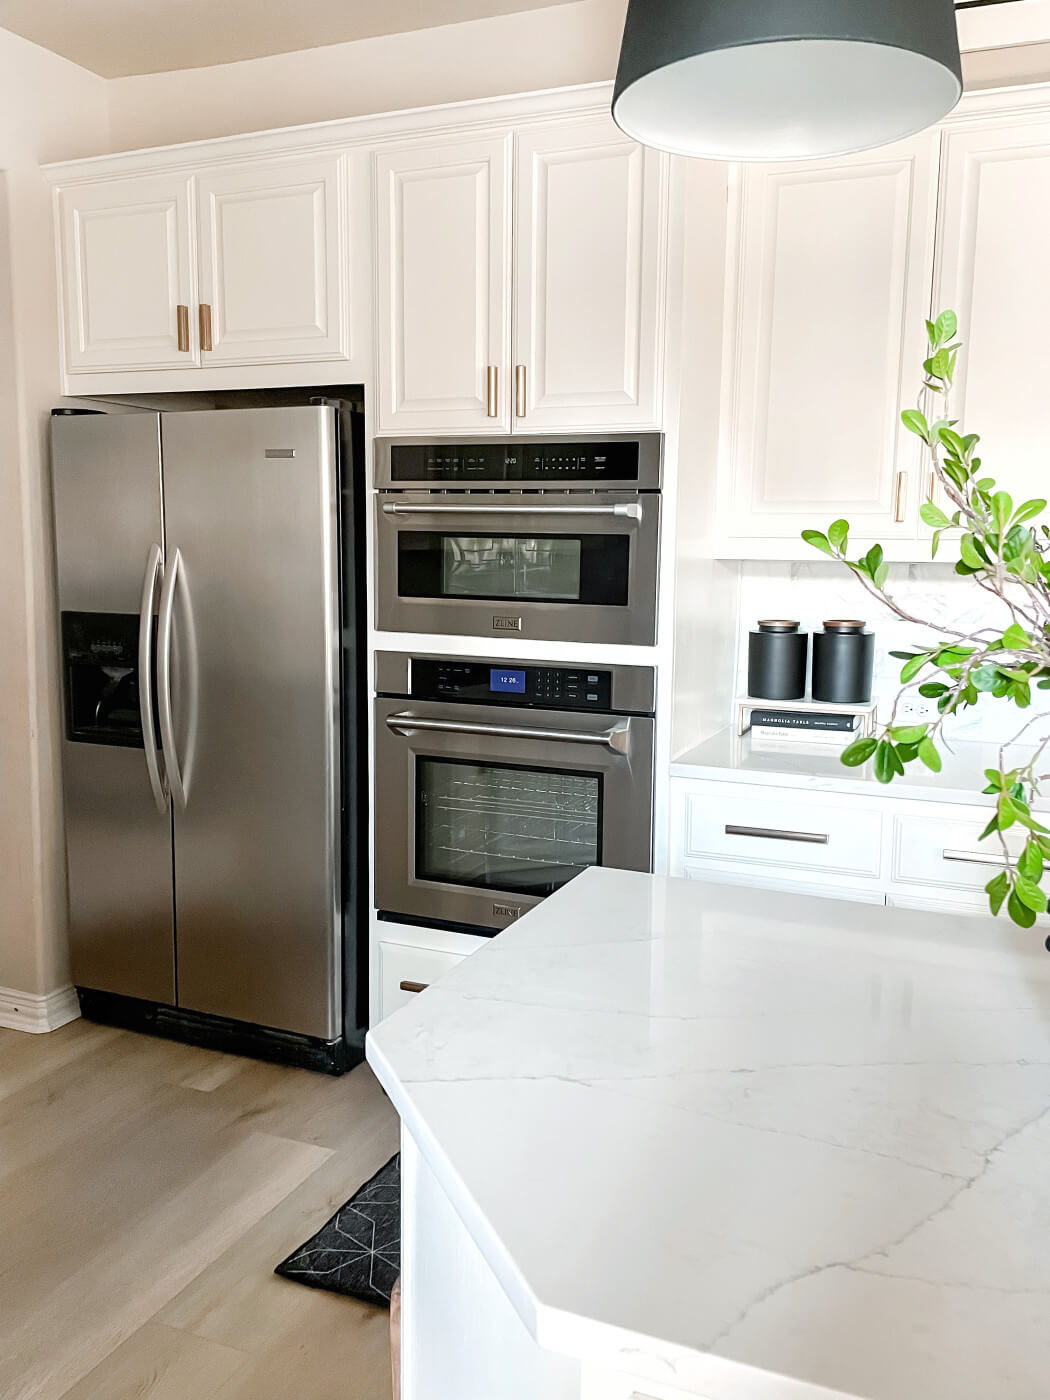 zline_stainless_steel_30_in_built-in_convection_microwavn_oven_and_30_in_single_wall_oven_with_self_clean_2KP-MW30-AWS30_lifestyle